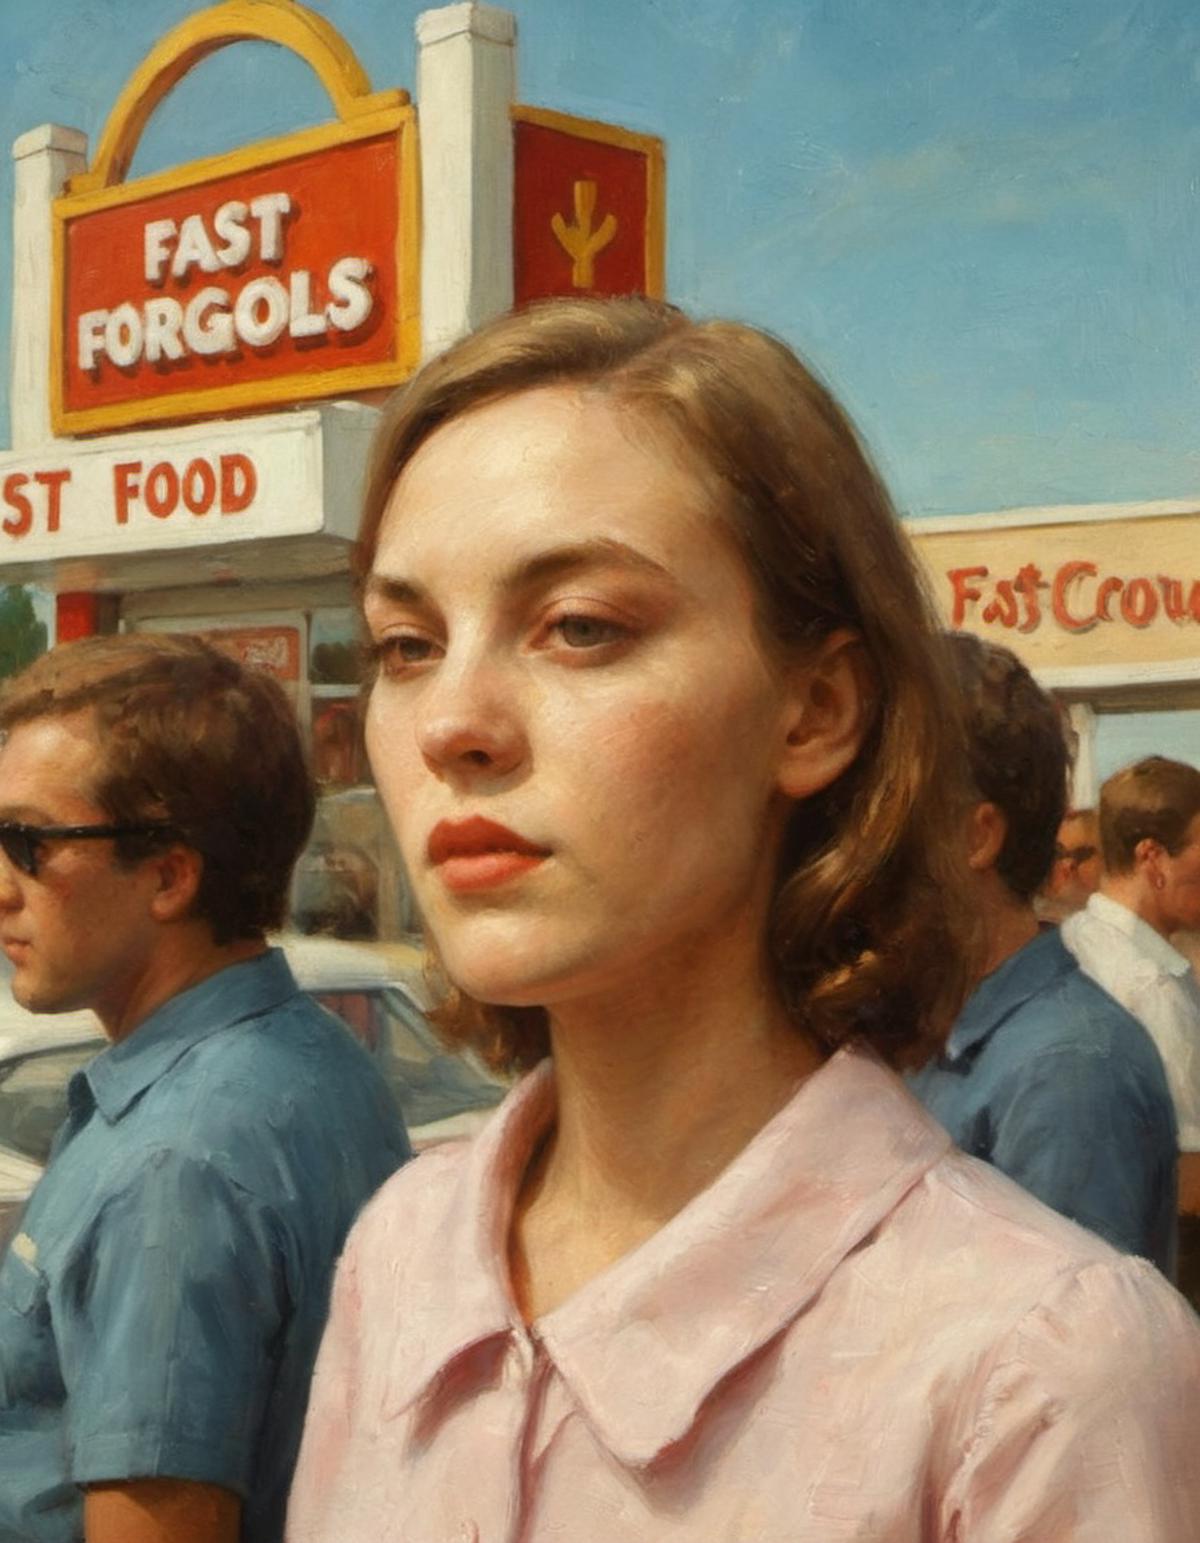 A woman stands outside a fast food restaurant with a group of people, one of whom is wearing a blue shirt.